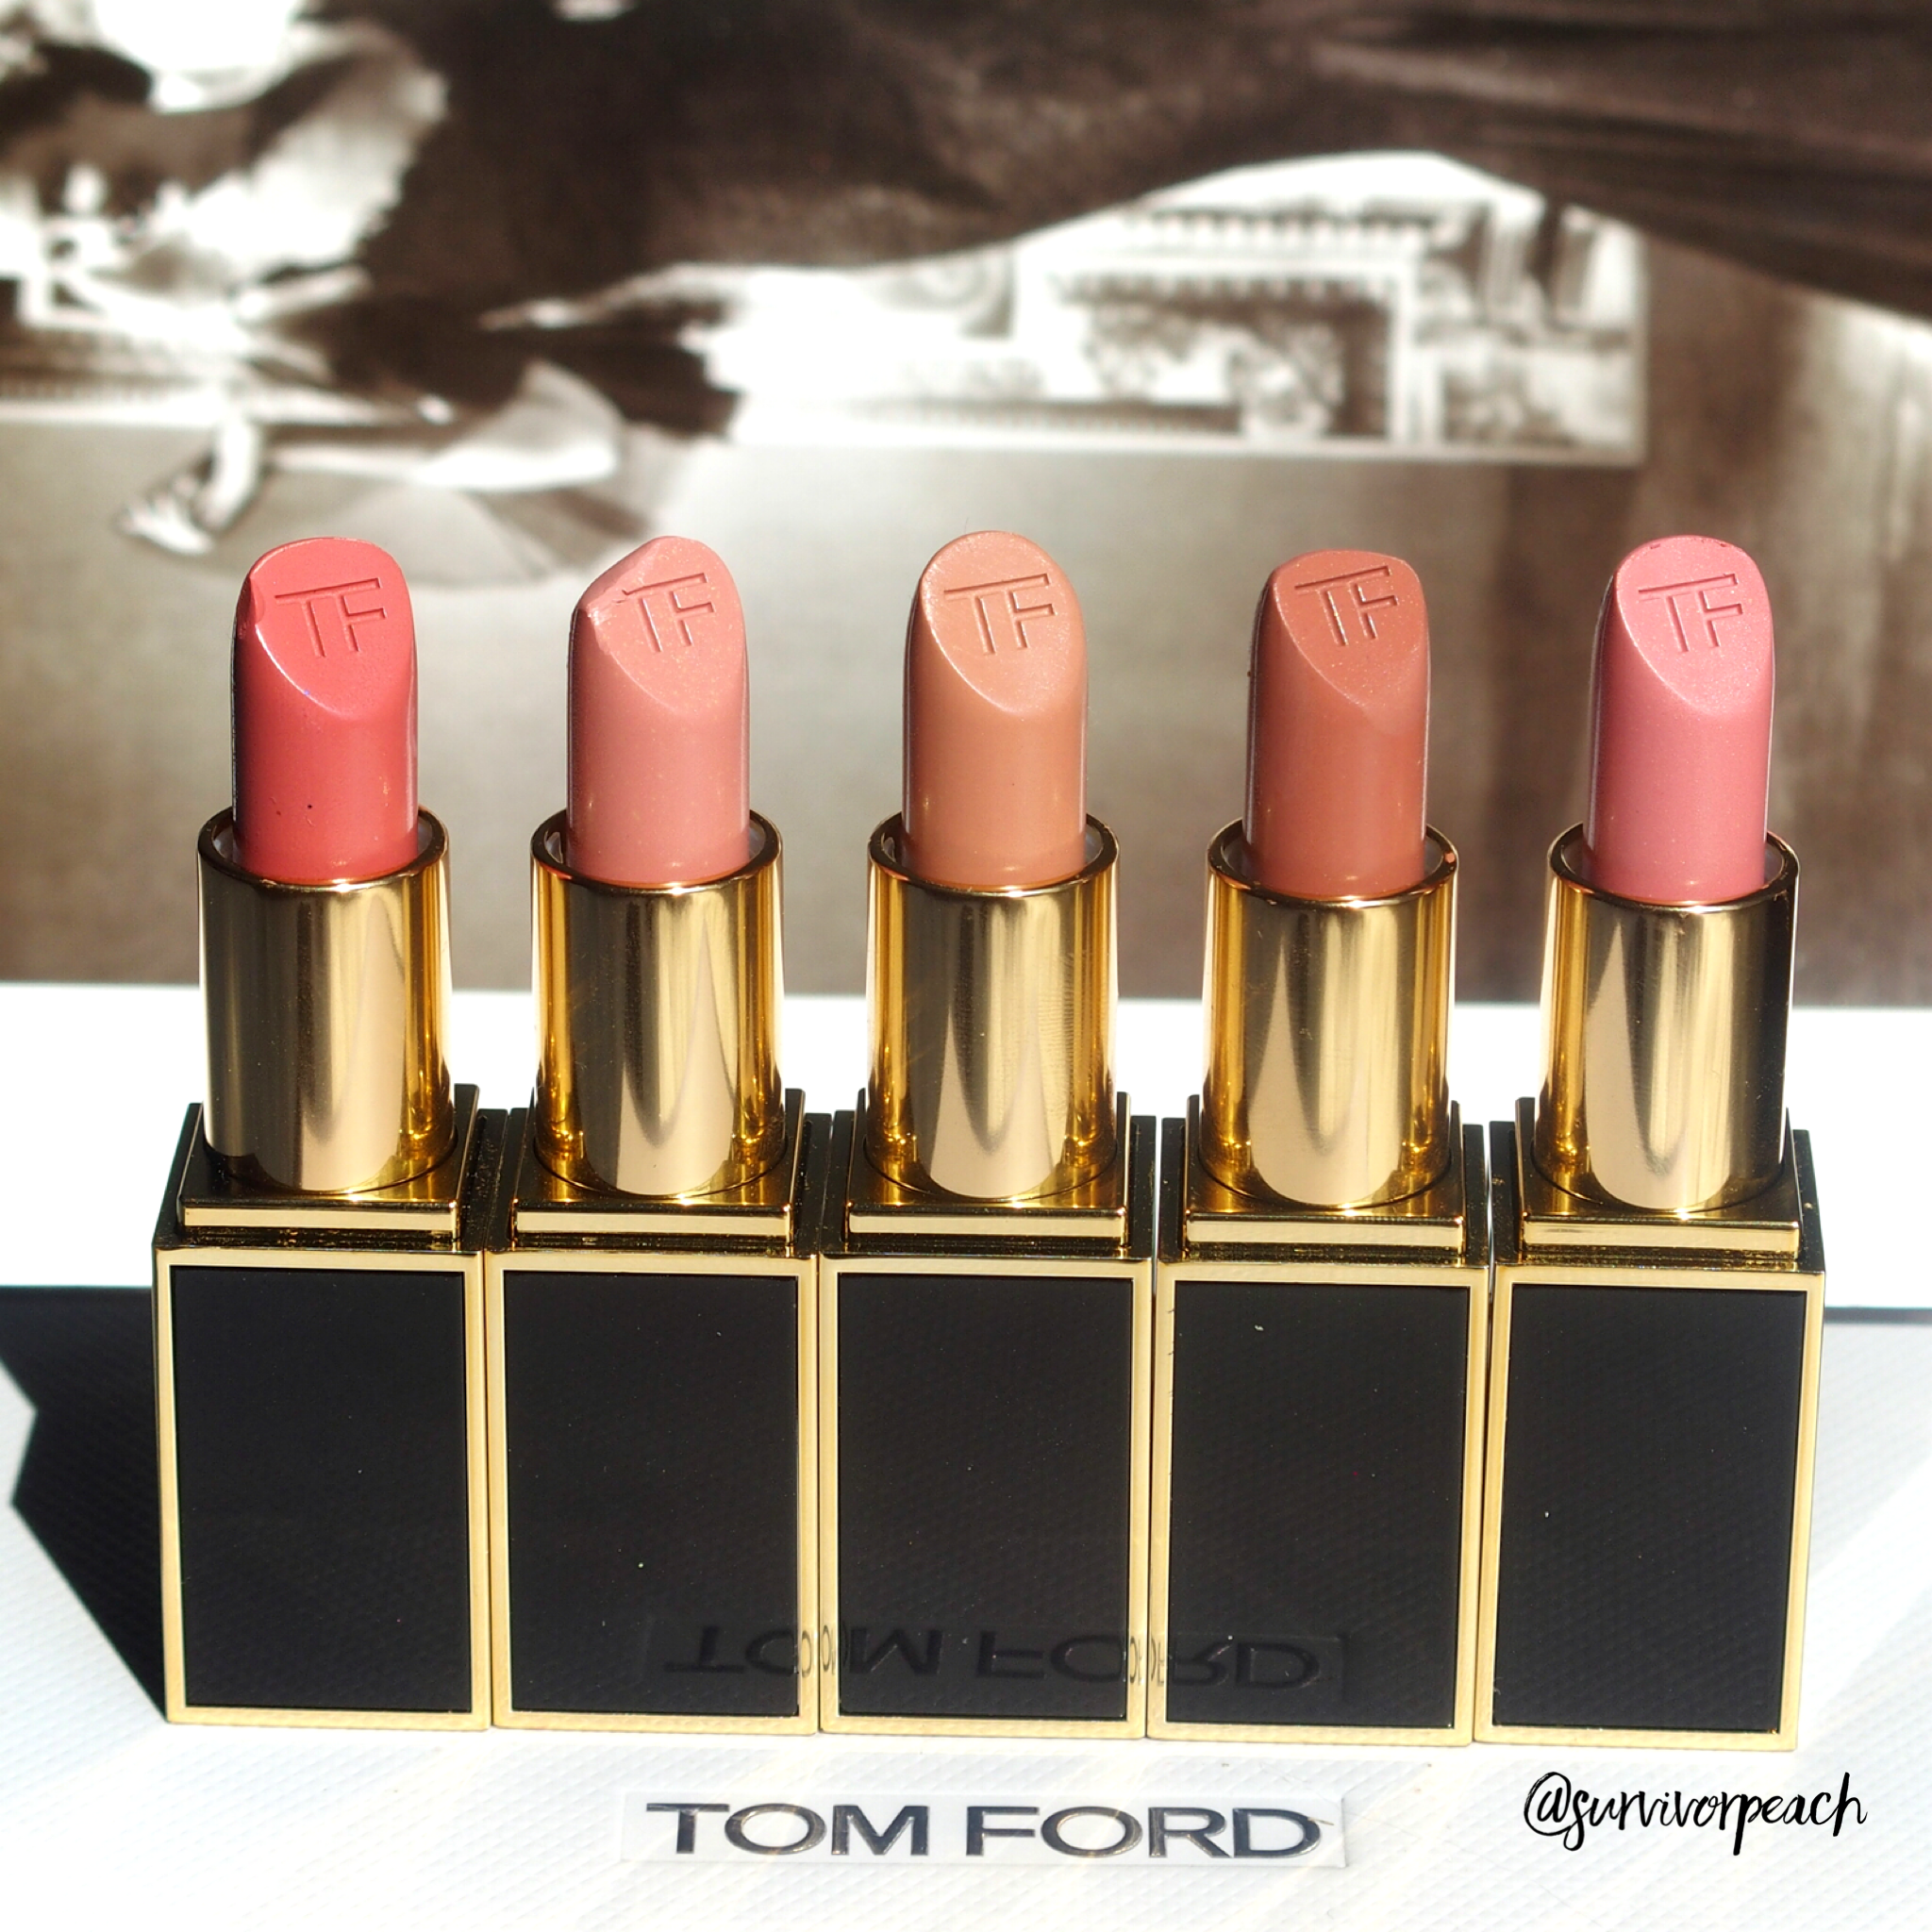 Tom Ford Beauty Age of Consent Lip Color Matte Review & Swatches